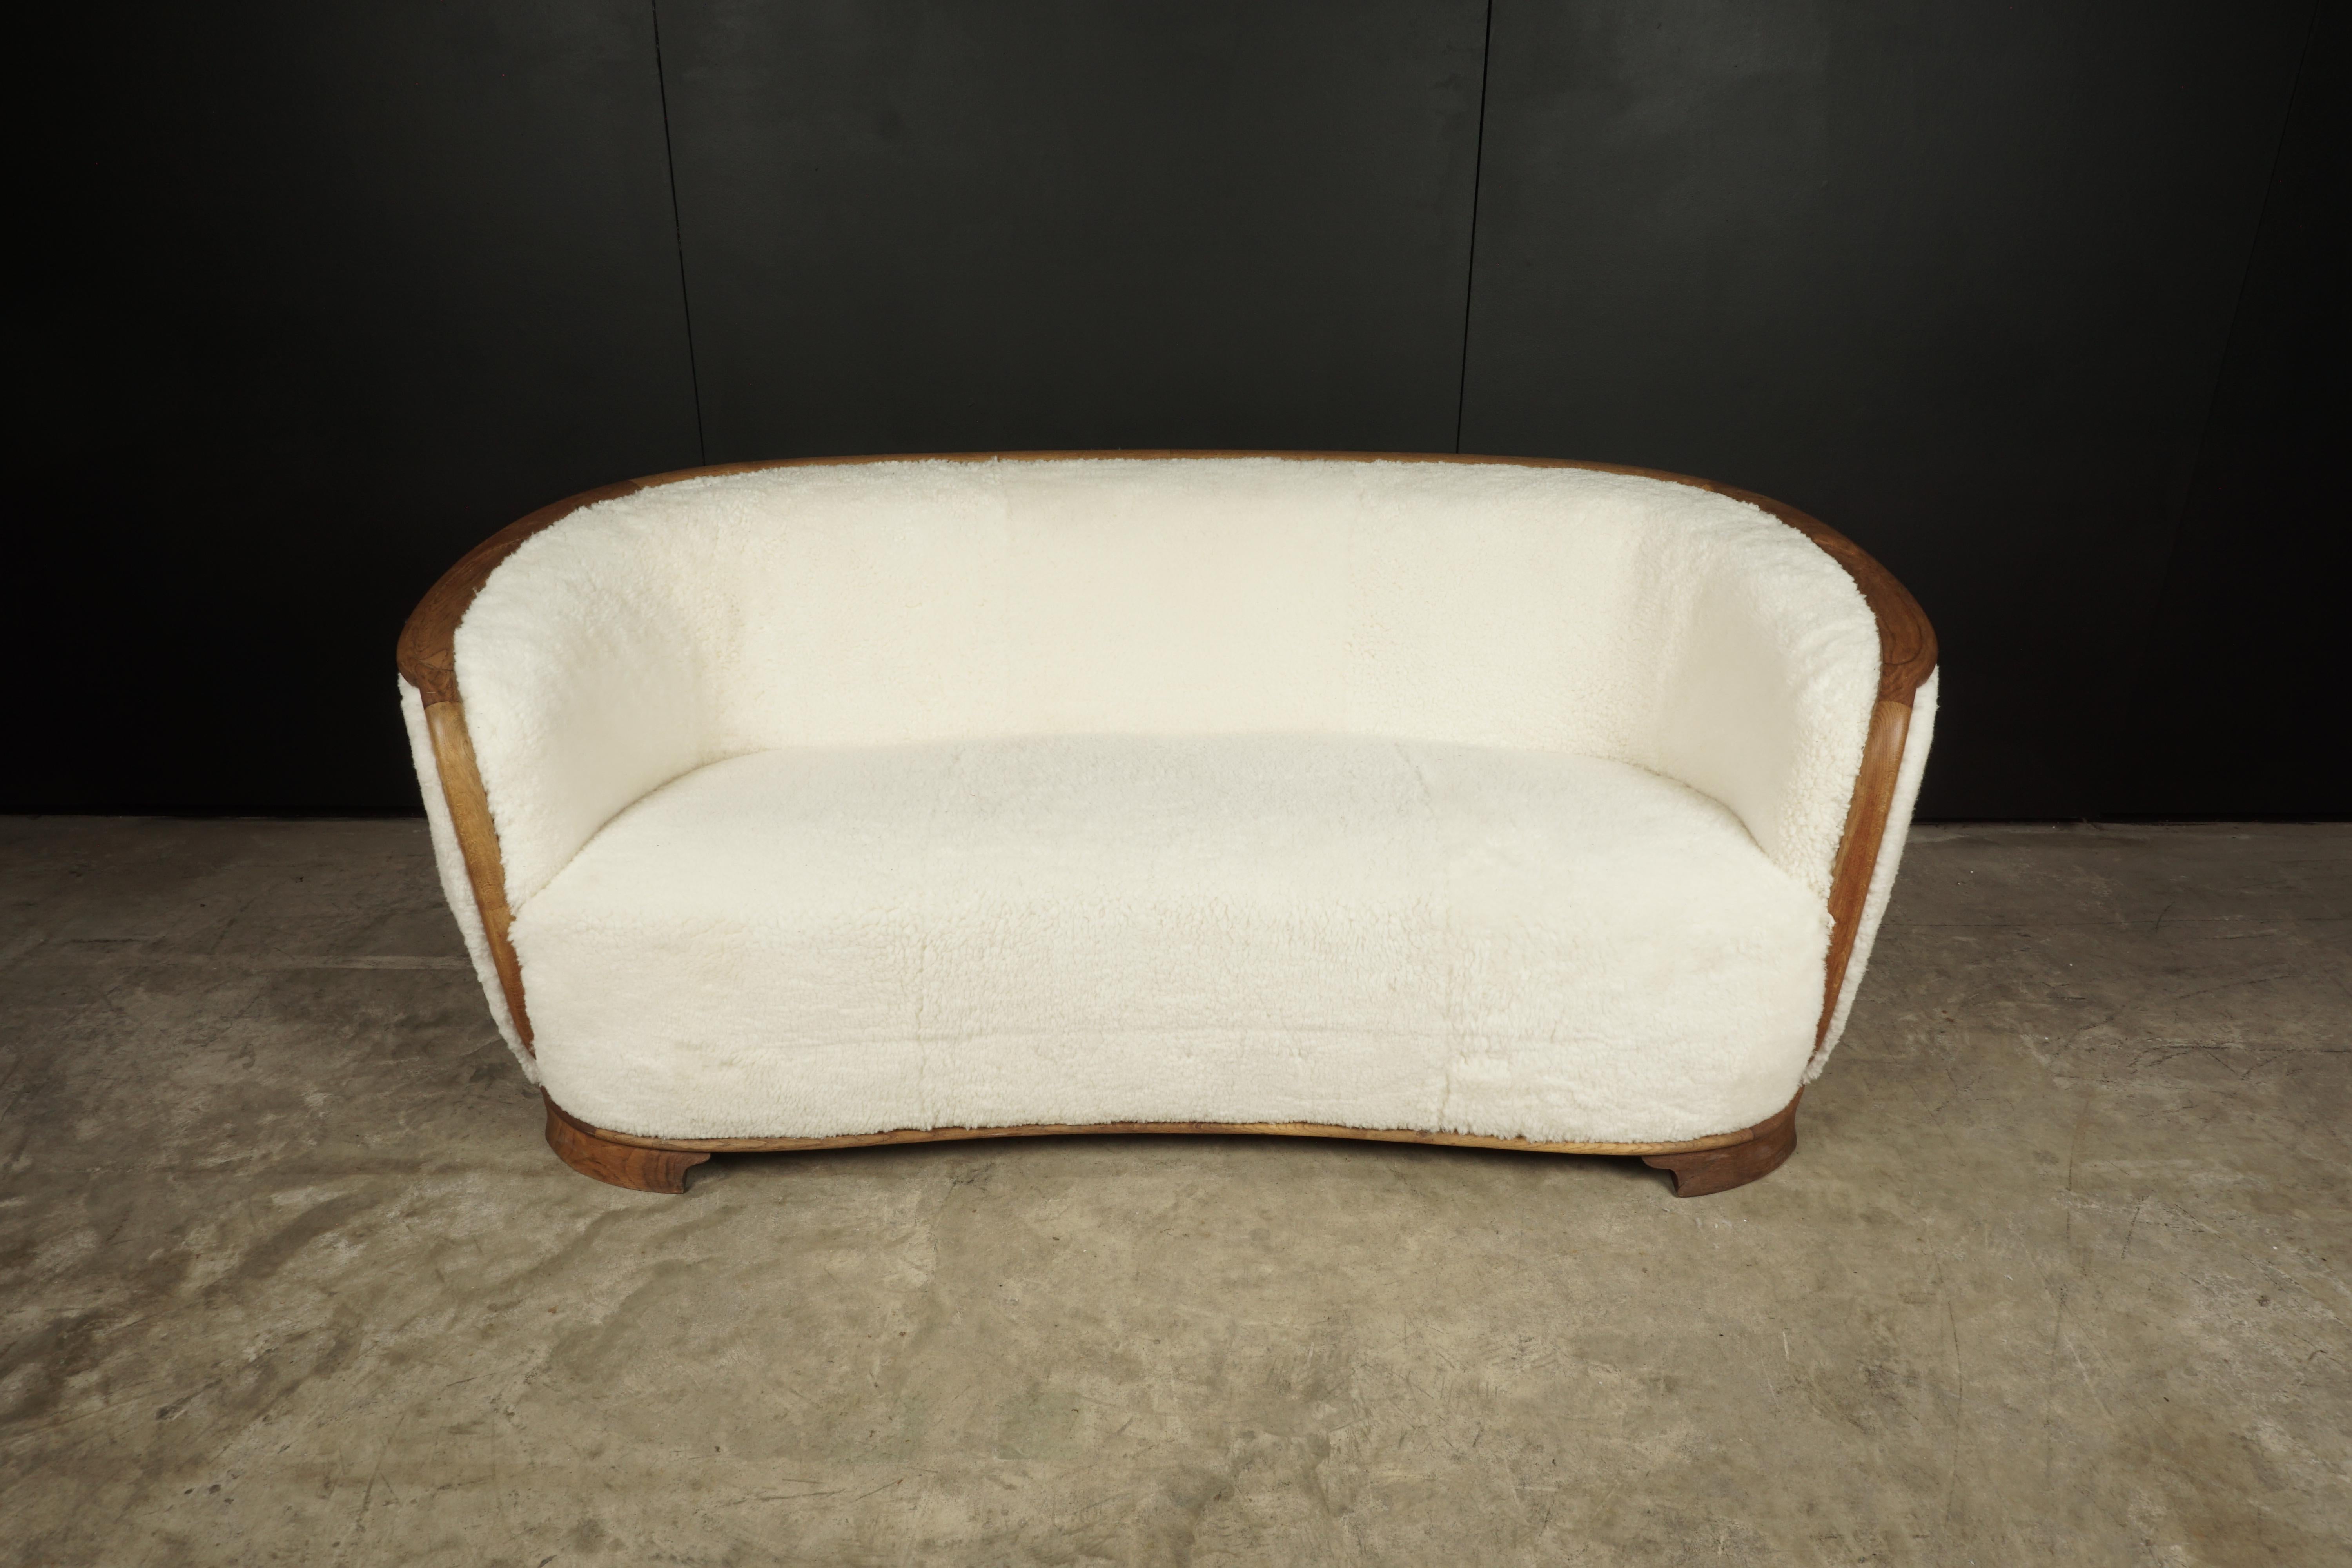 Rare Vintage Cabinet Maker Sofa in Sheepskin, Denmark, 1950s. Sofa with an oak edge and a slightly curved shape. Great condition and quality.